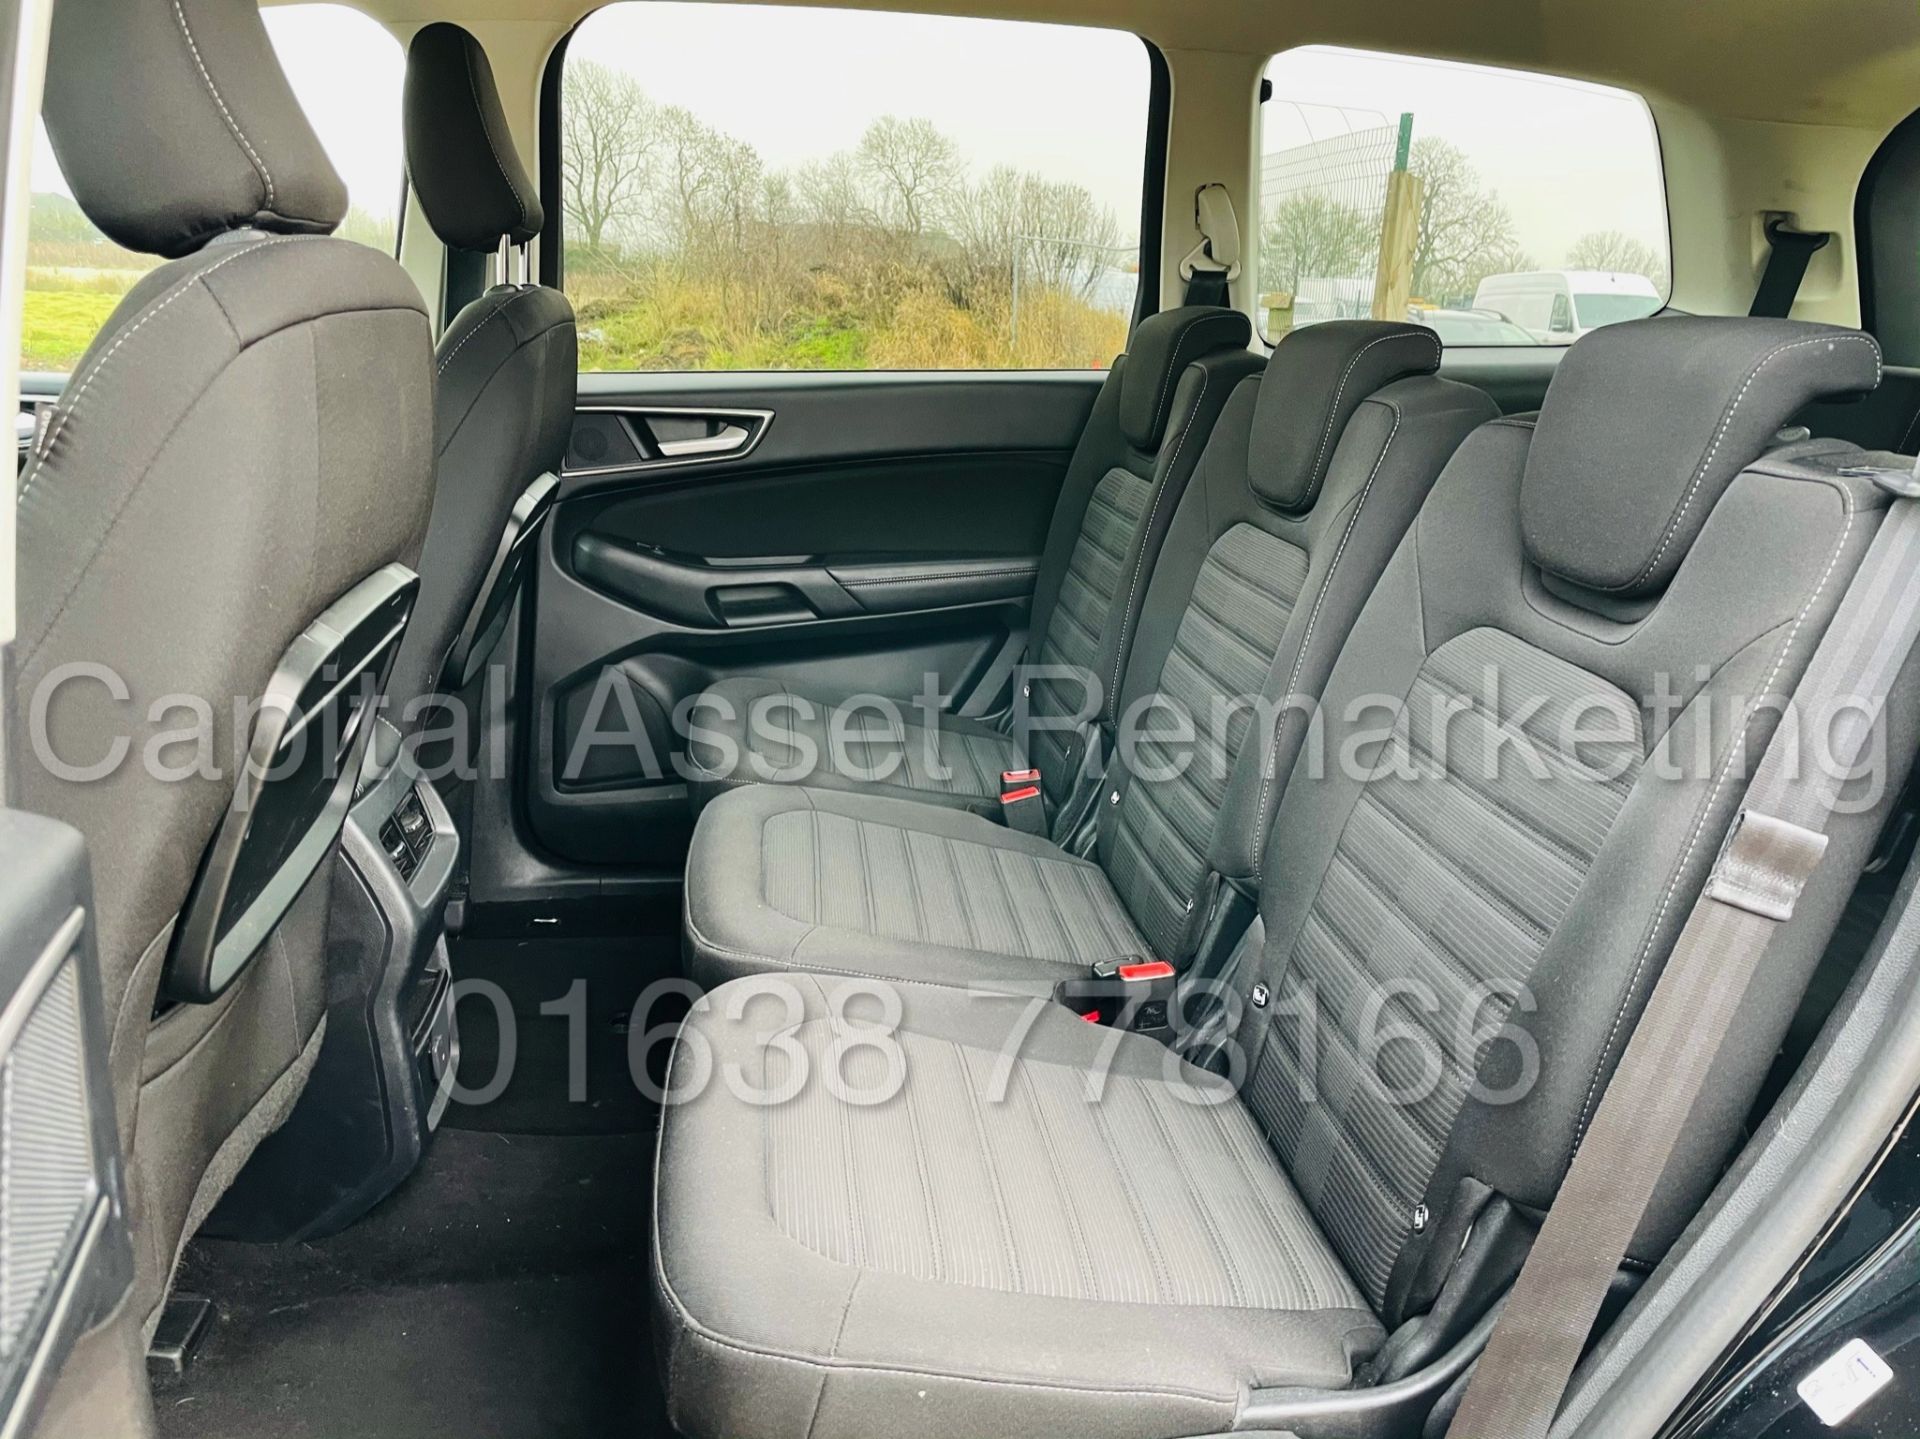 ON SALE FORD GALAXY *ZETEC EDITION* 7 SEATER MPV (2017 - EURO 6) '2.0 TDCI - AUTO' (- FULL HISTORY) - Image 25 of 48